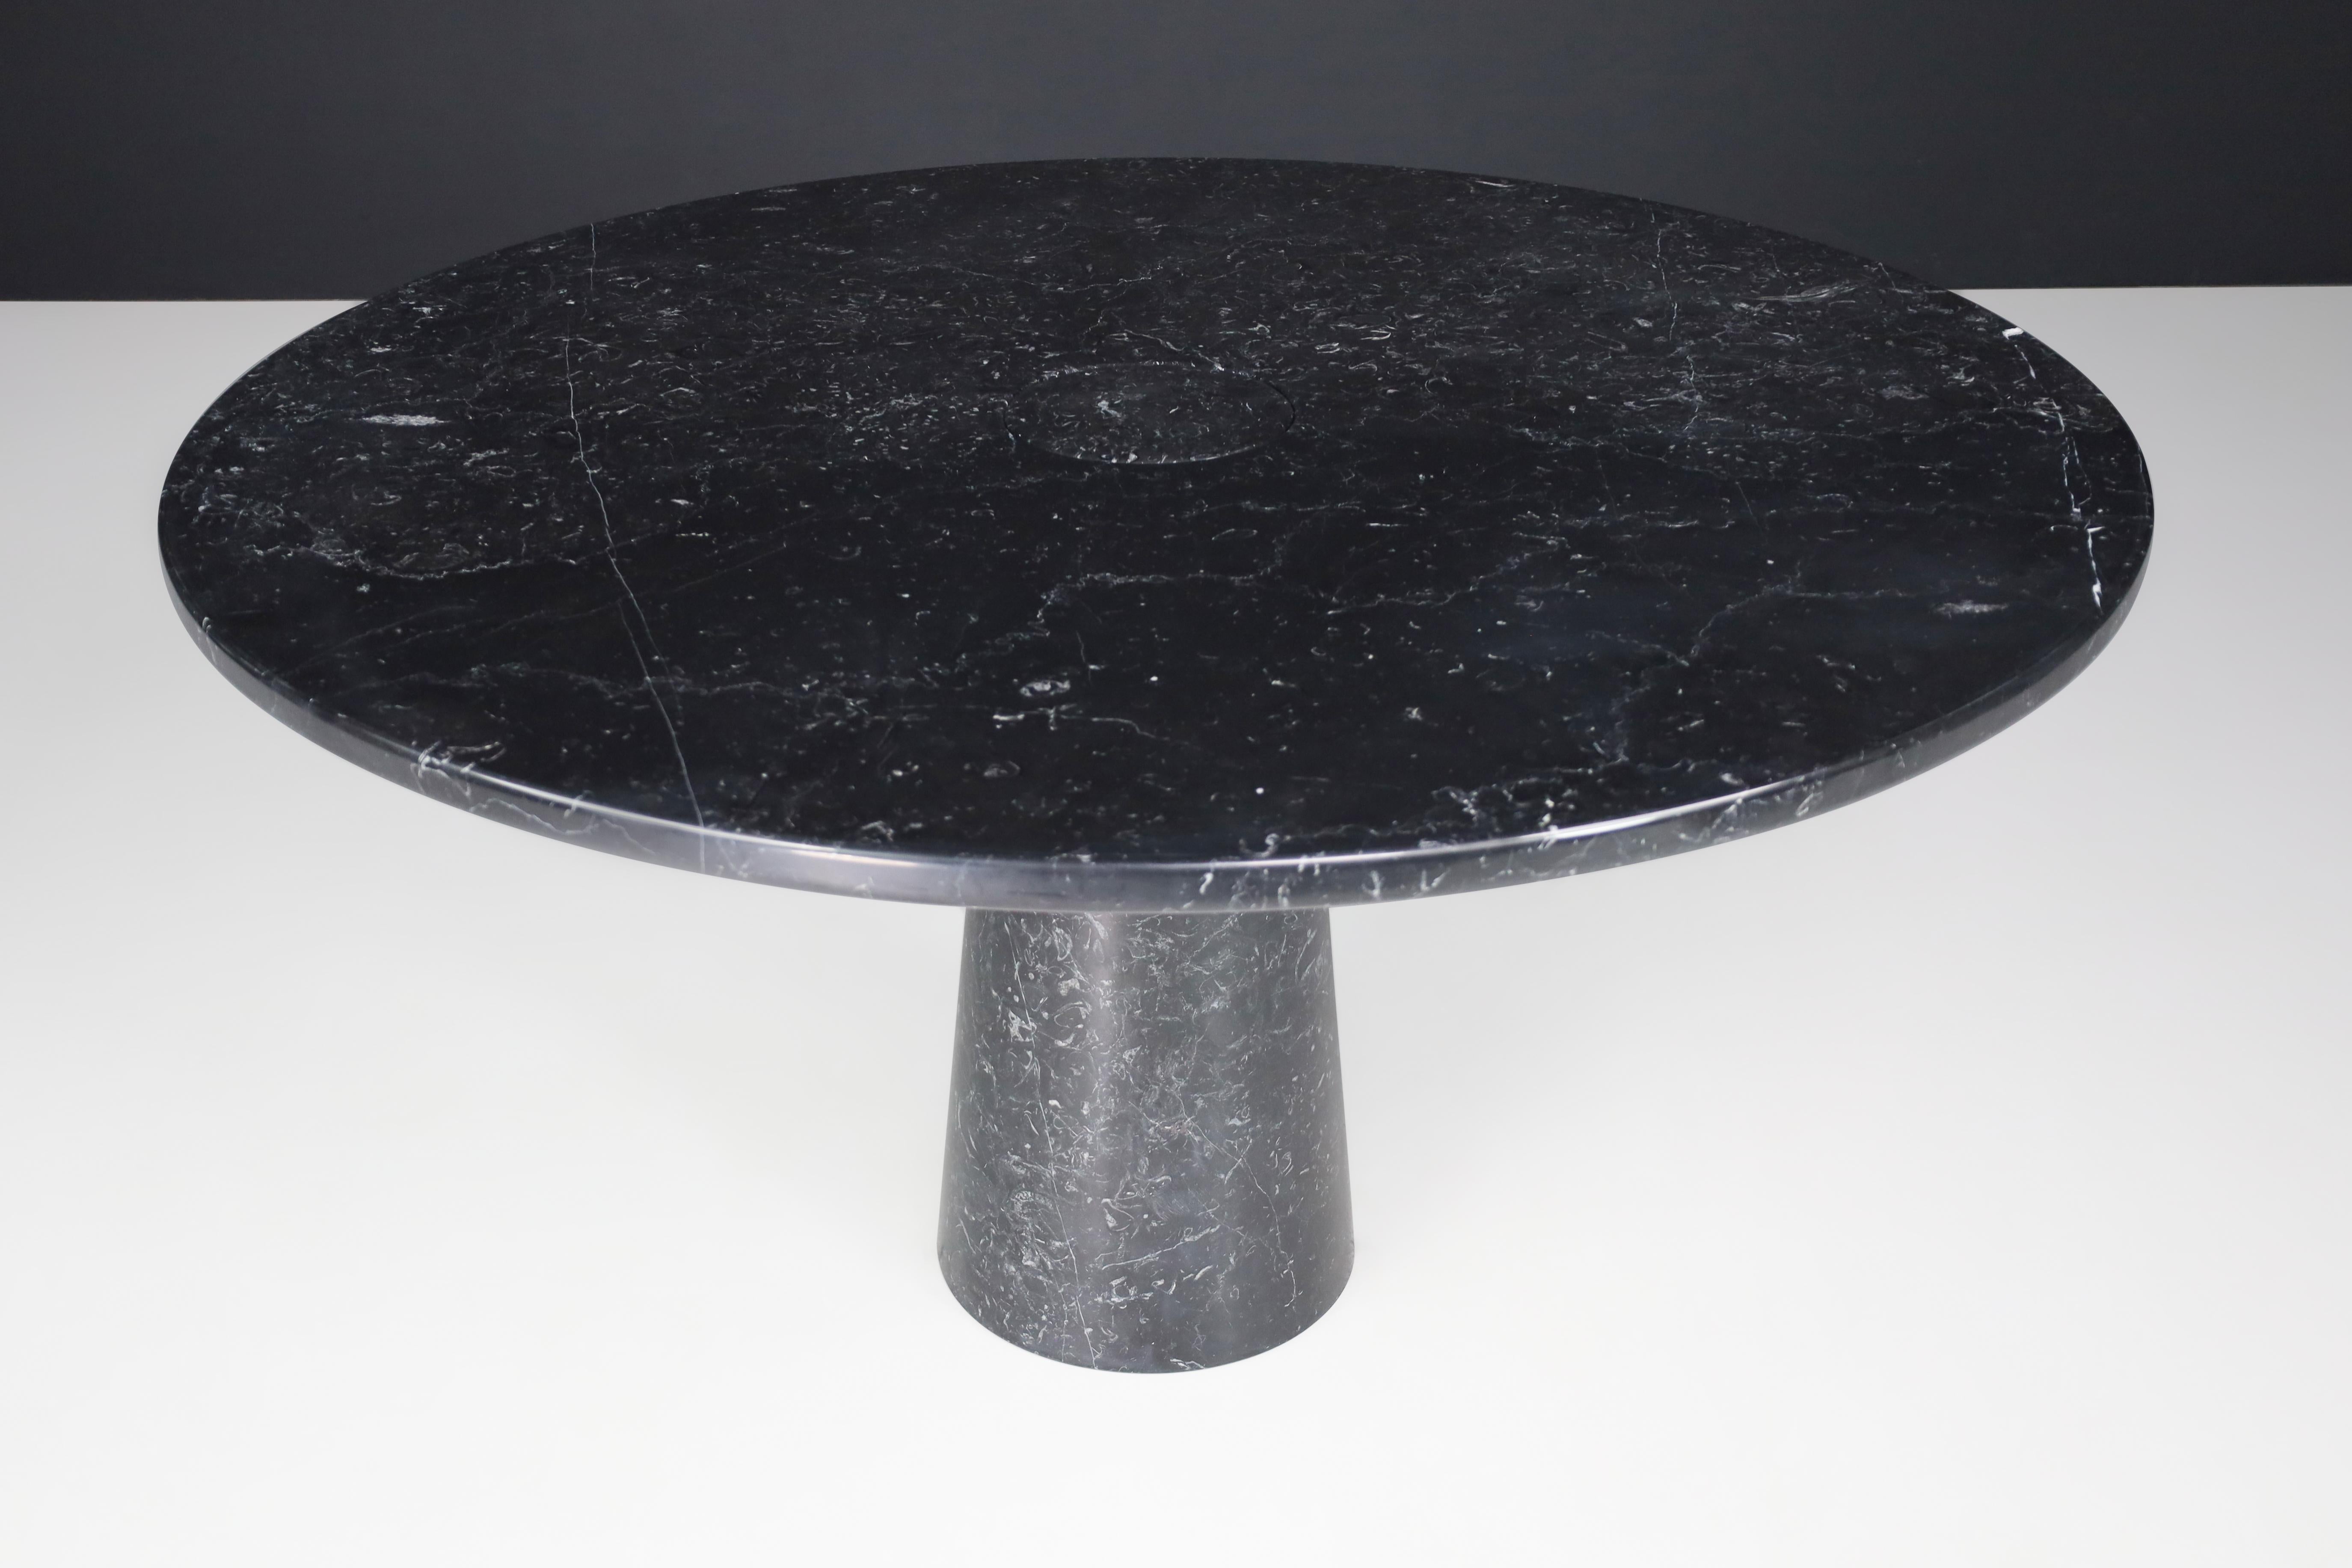 Angelo Mangiarotti for Skipper 'Eros' round dining table in Marquina Marble, Italy 1970s.

Angelo Mangiarotti created it for Skipper from the 'Eros' series, an iconic round dining table in Nero Marquina Marble. Gorgeous design with the conical